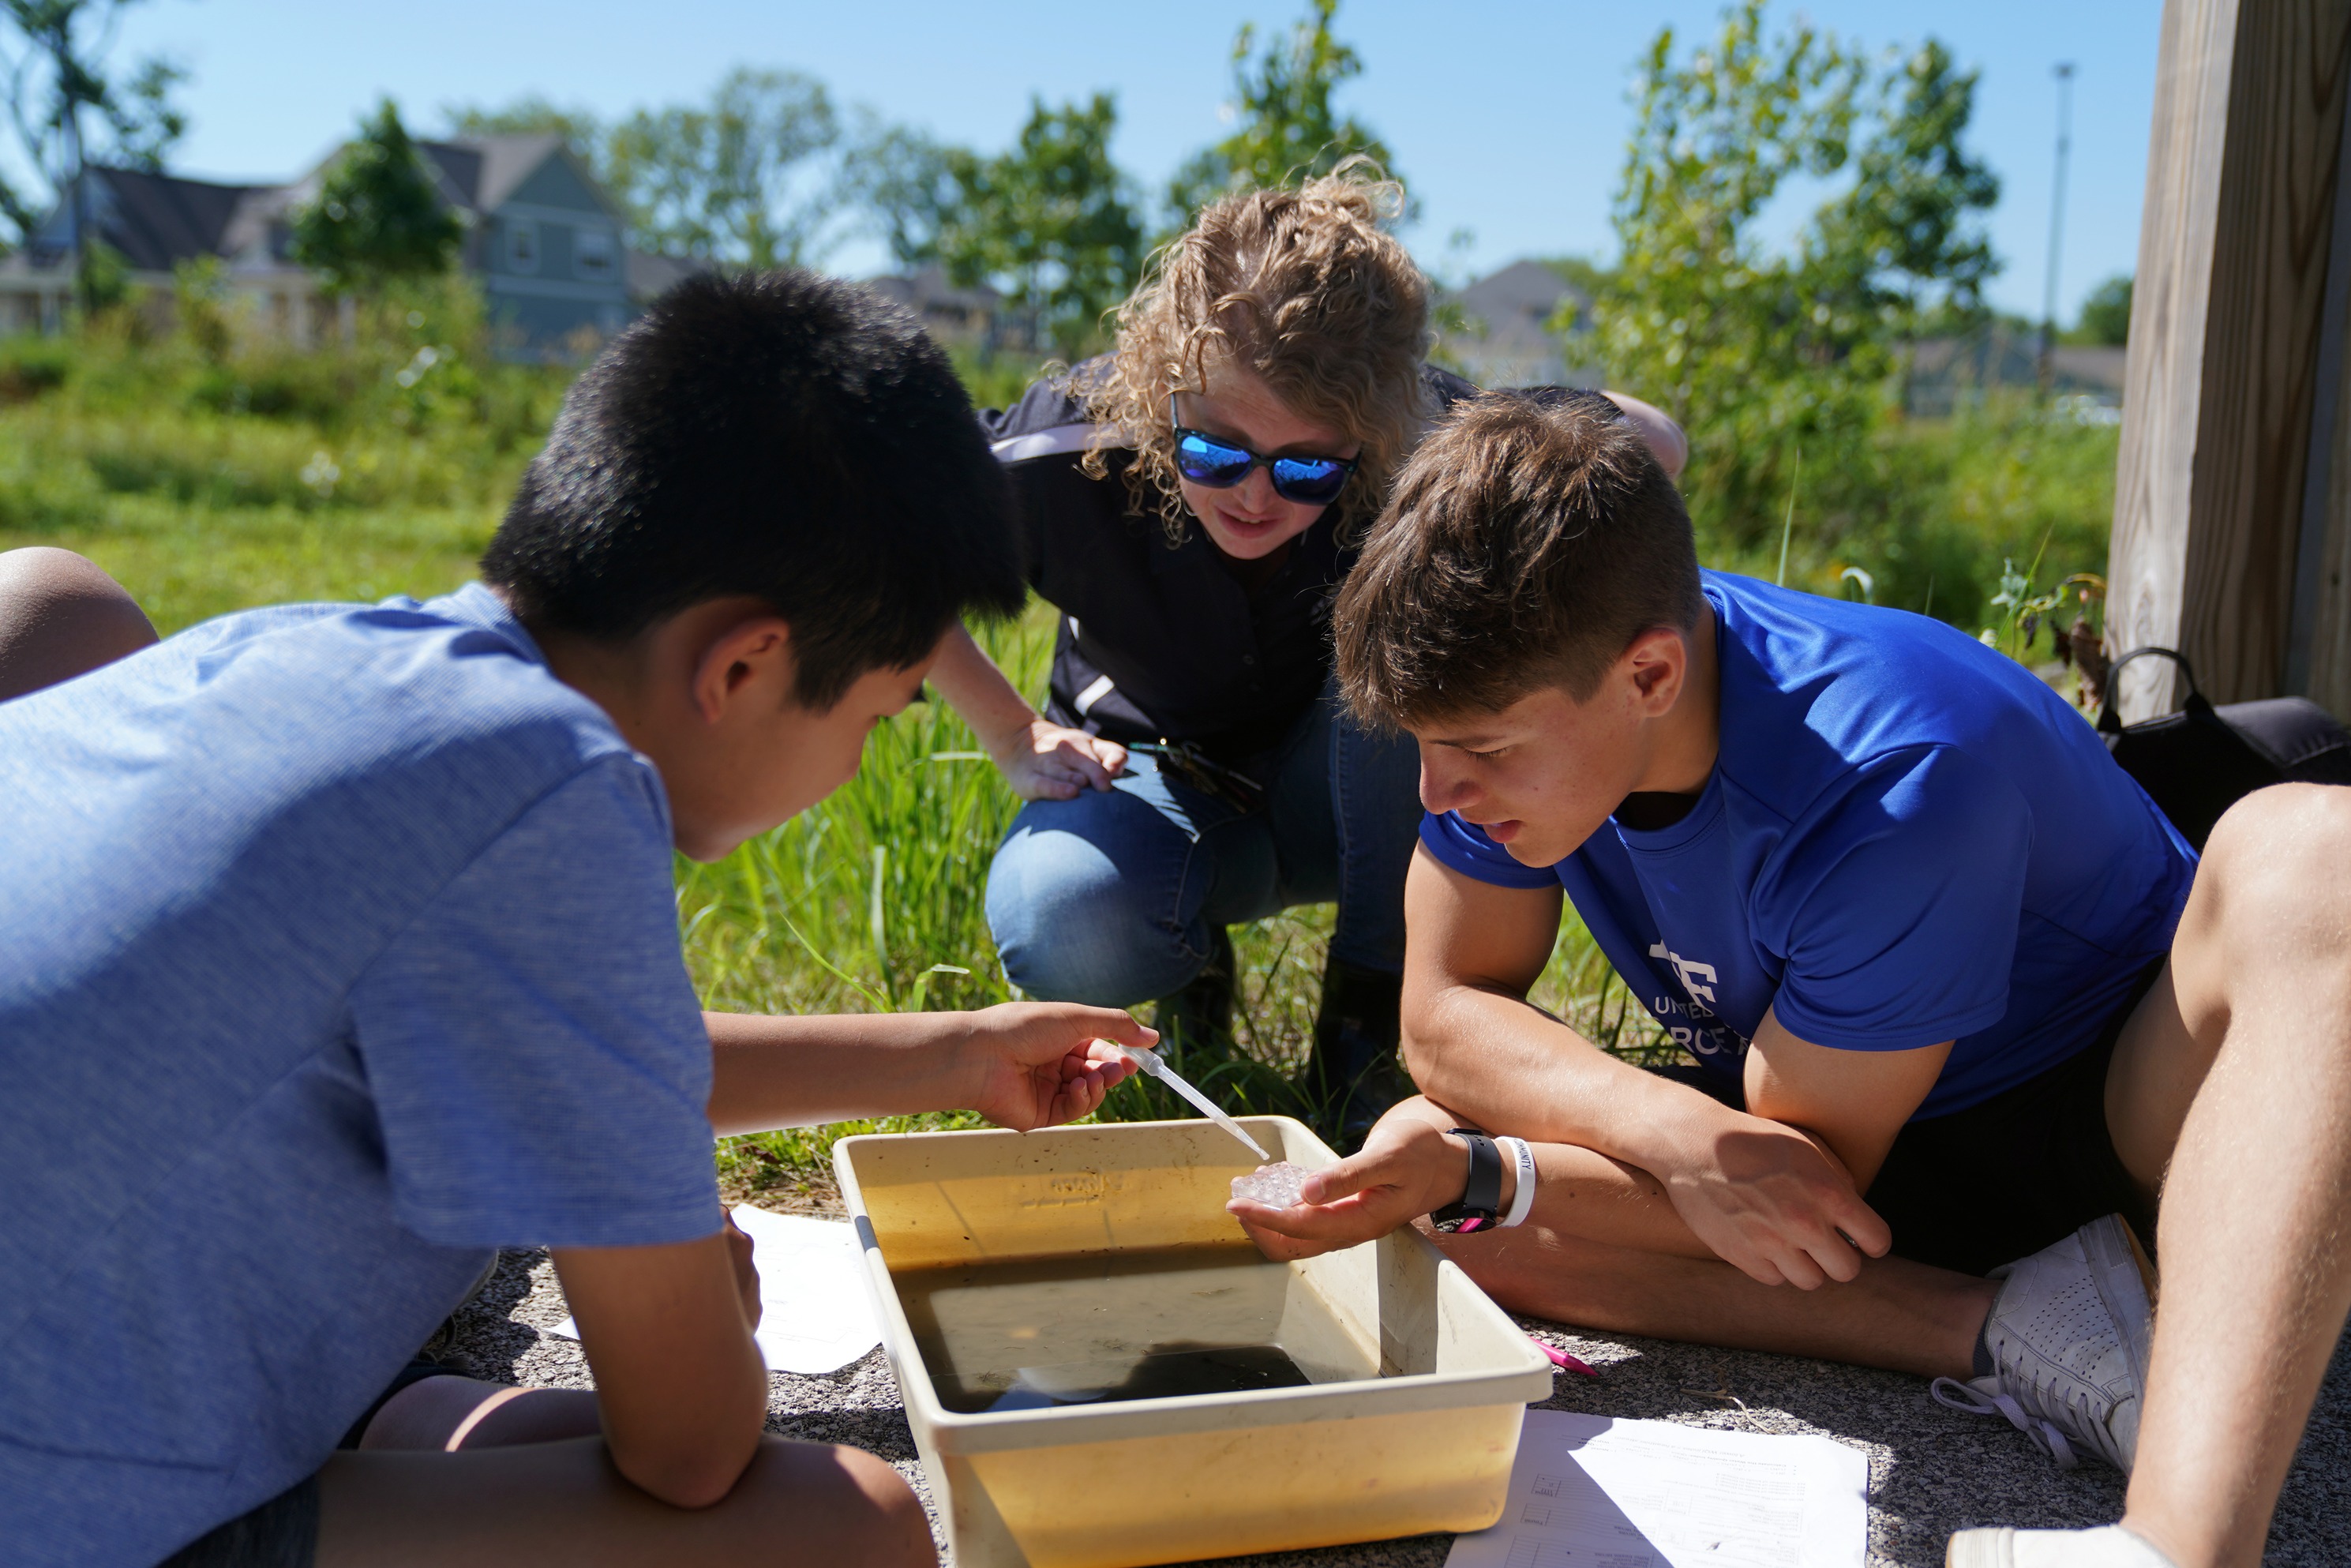 Caitlin Proctor observes creek water samples with students.